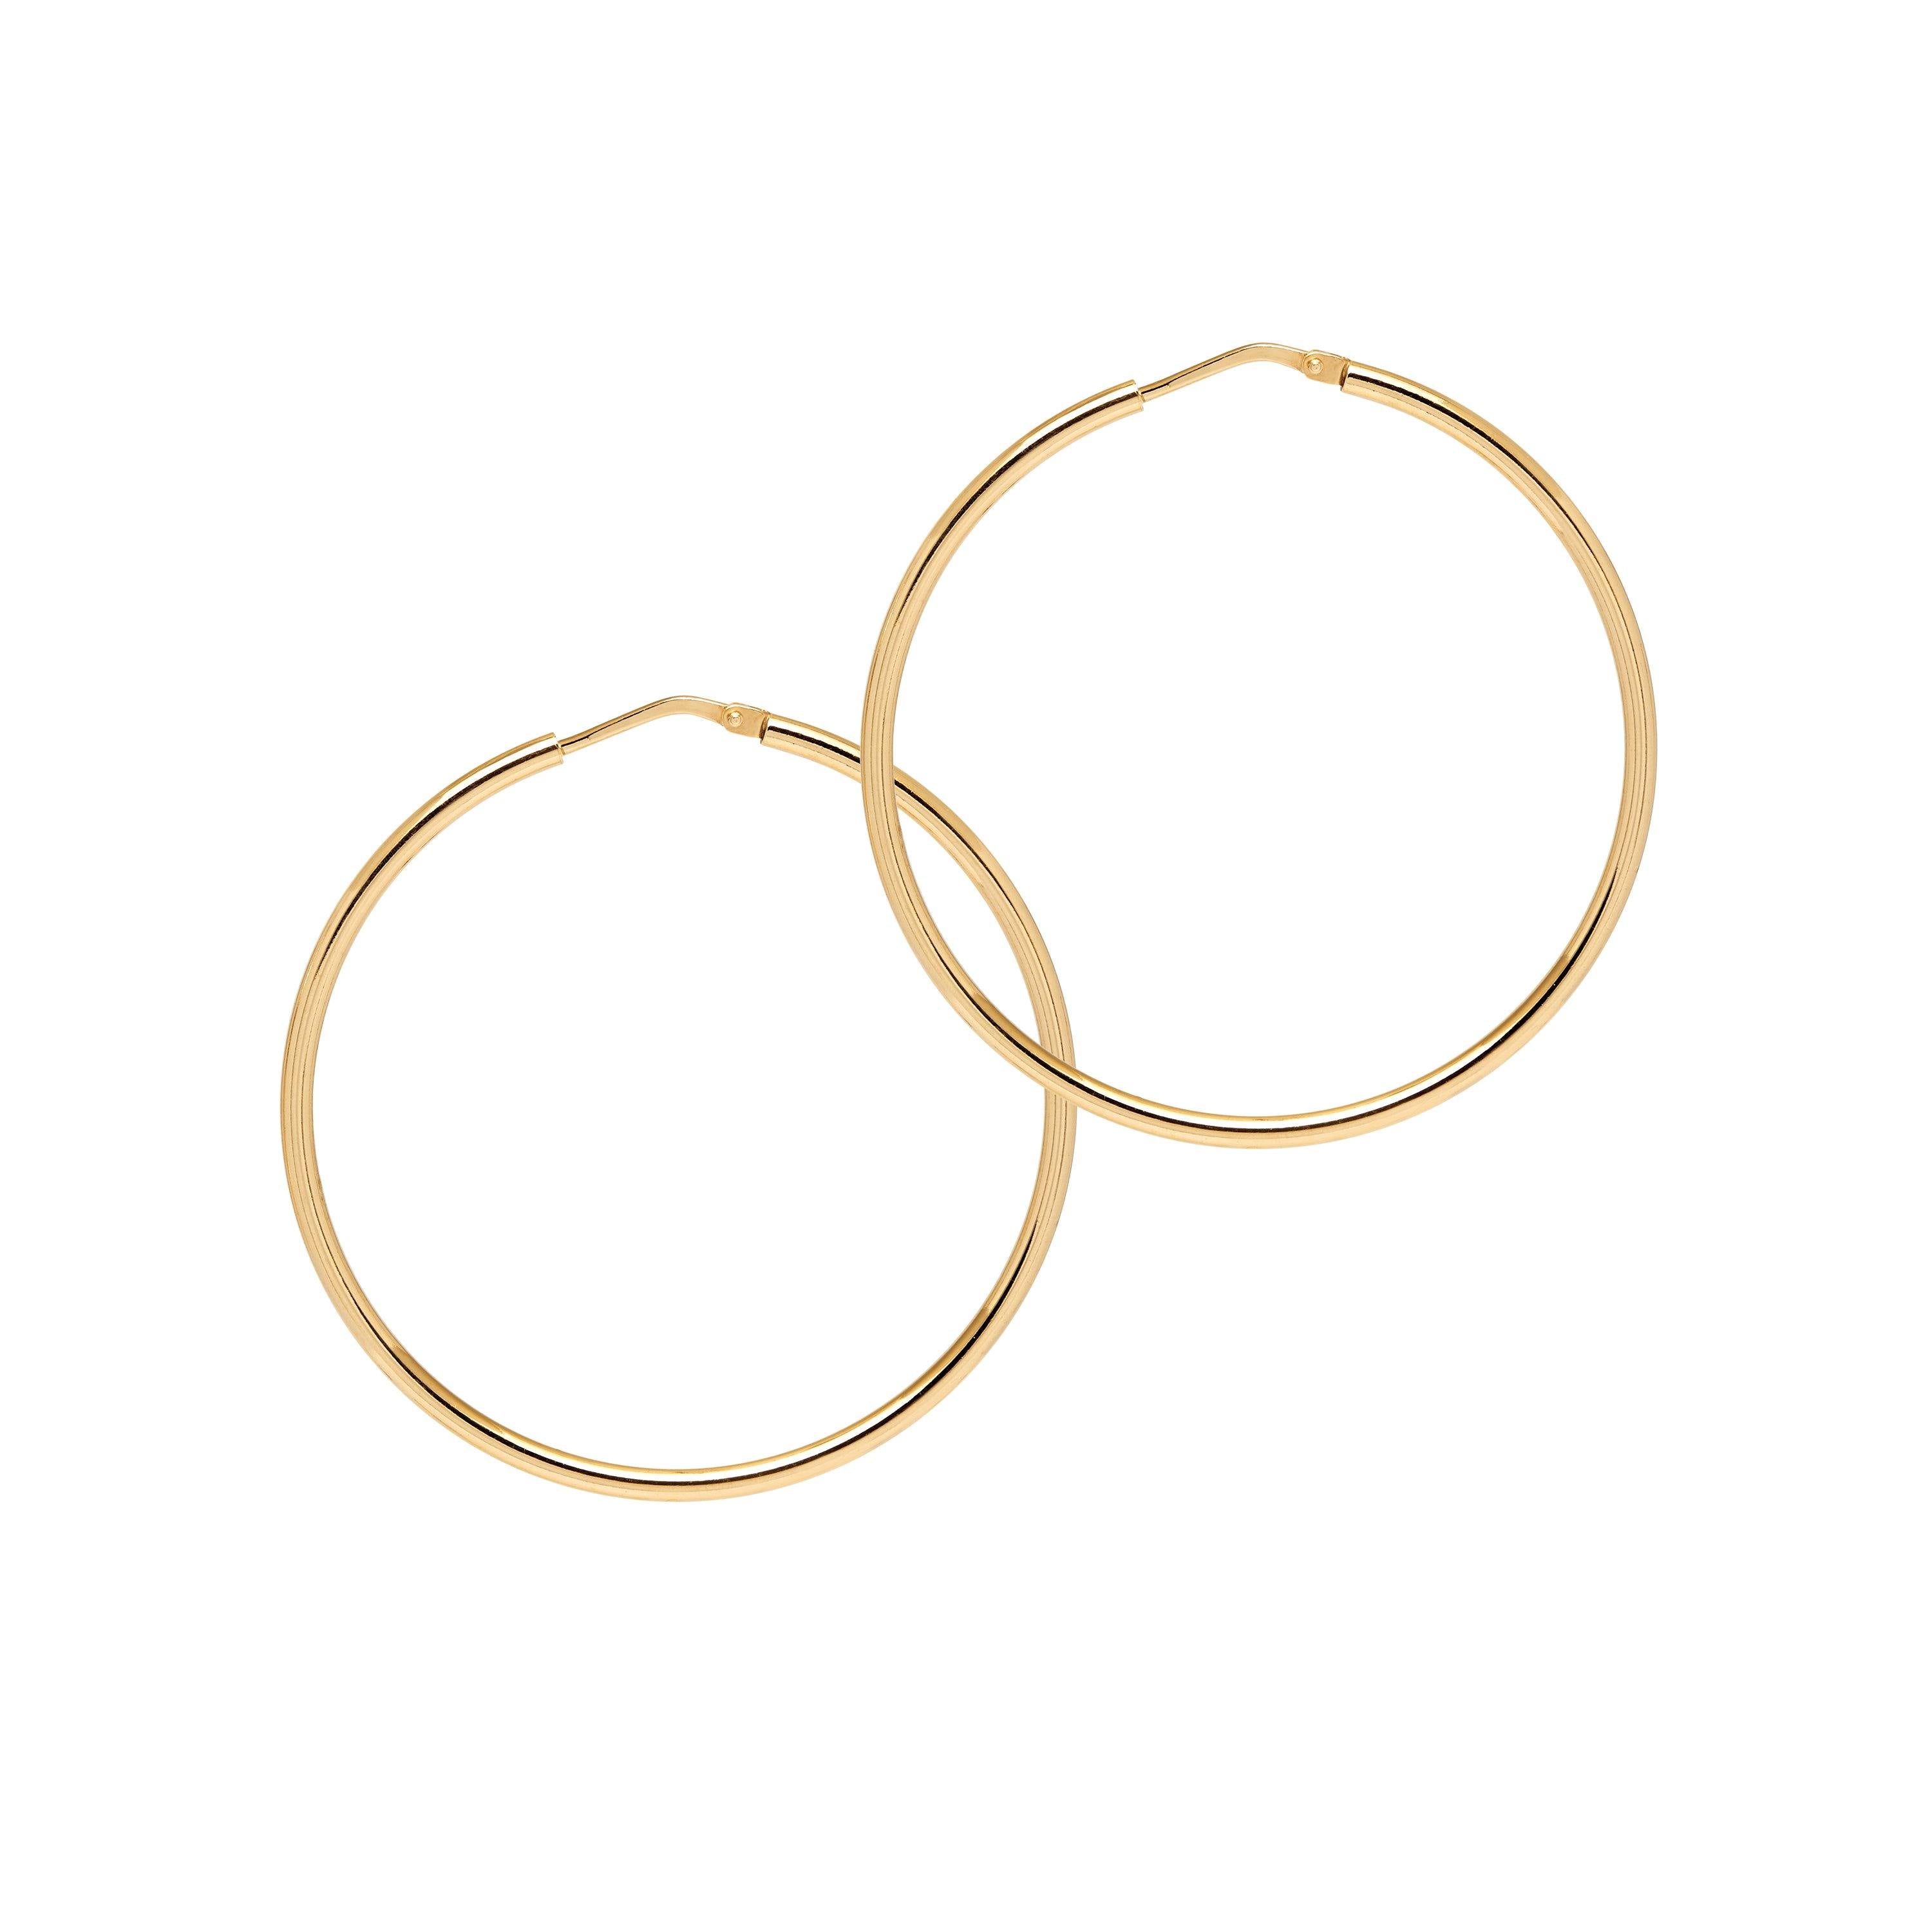 Chica Latina Collection - Gold - THE HOOP STATION